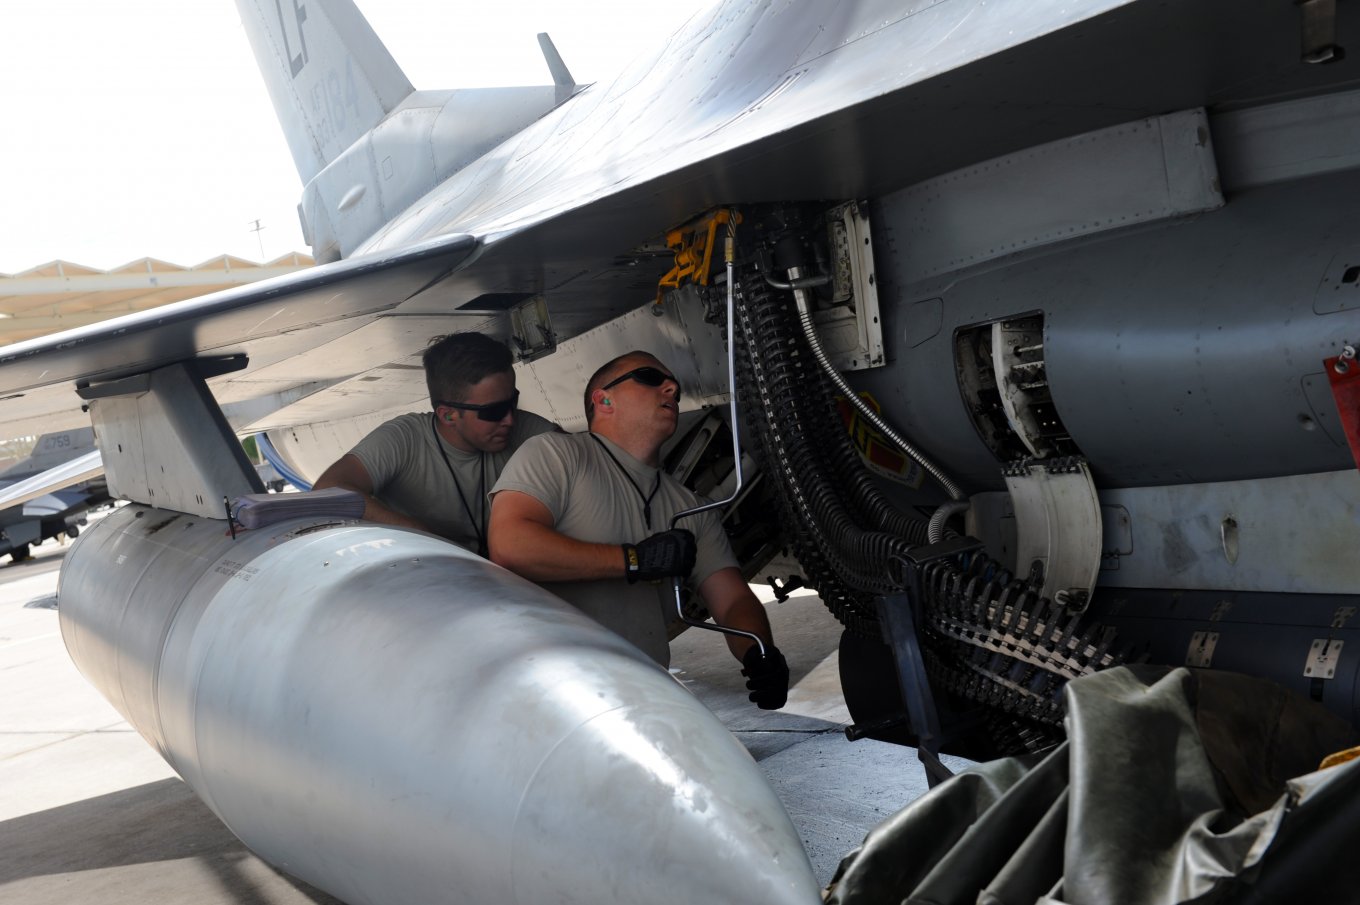 F-16 maintenance: configuring an F-16 for weapons load training